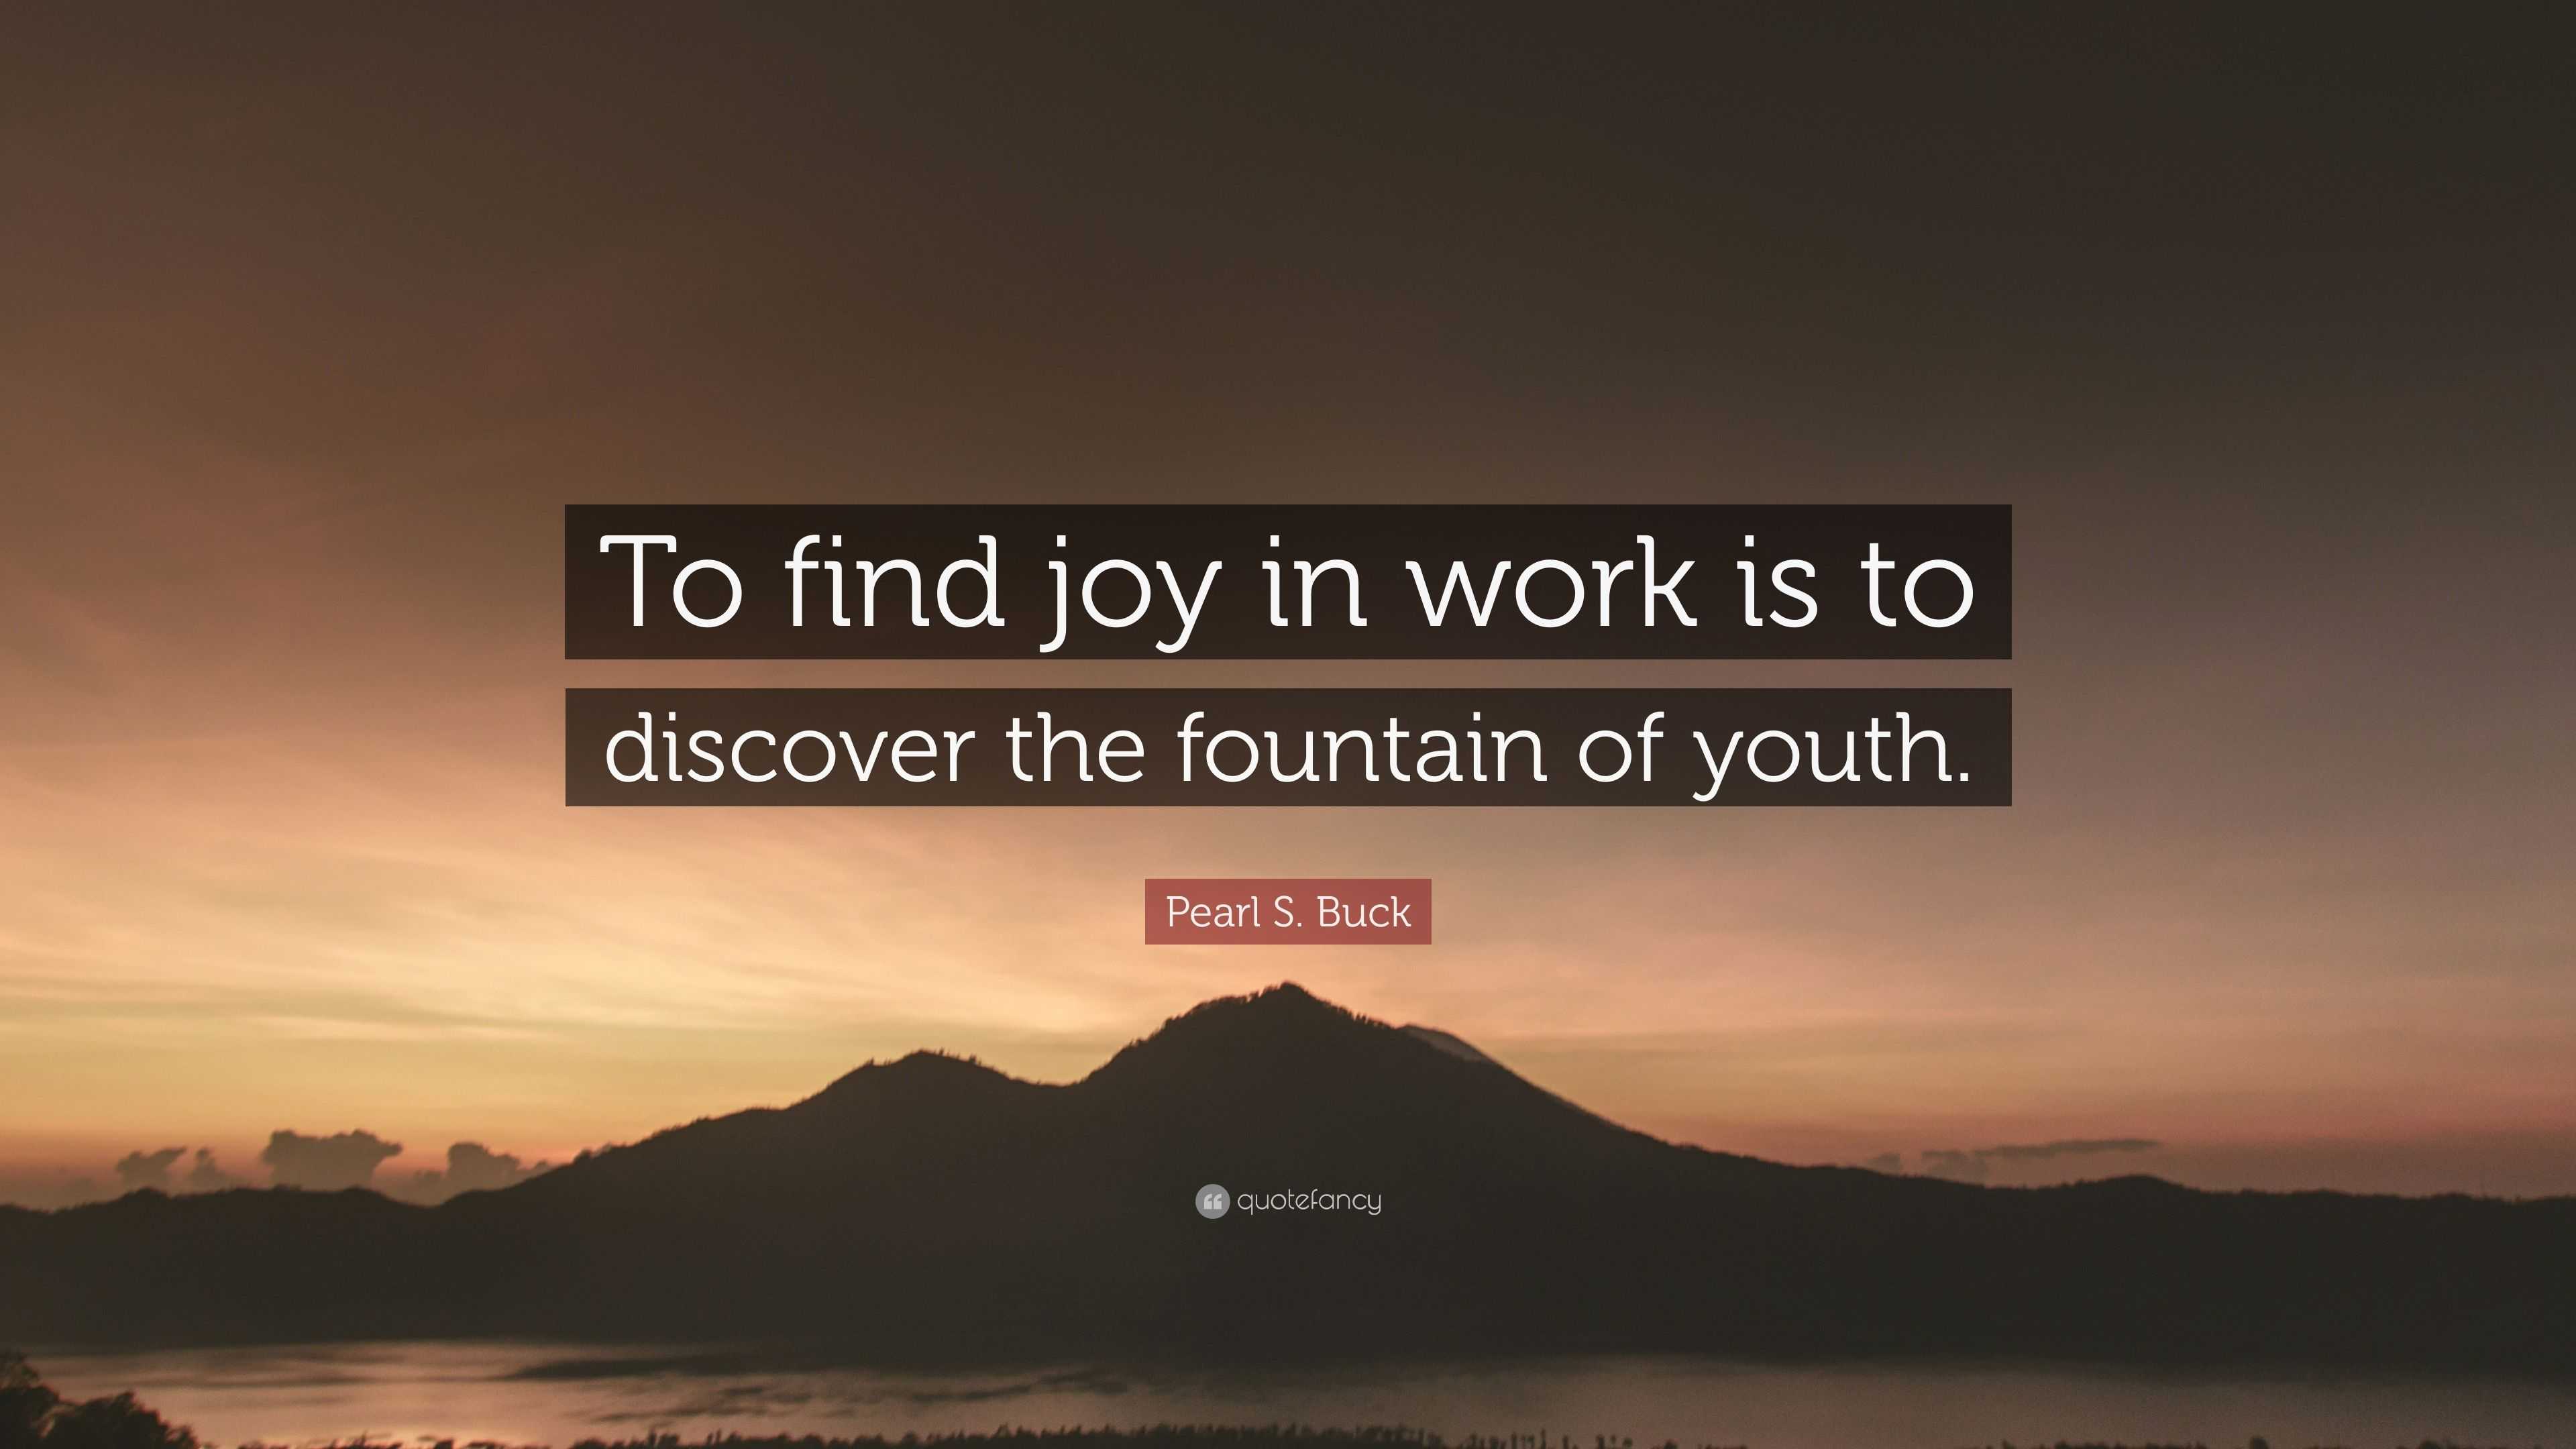 4692008 Pearl S Buck Quote To Find Joy In Work Is To Discover The Fountain 